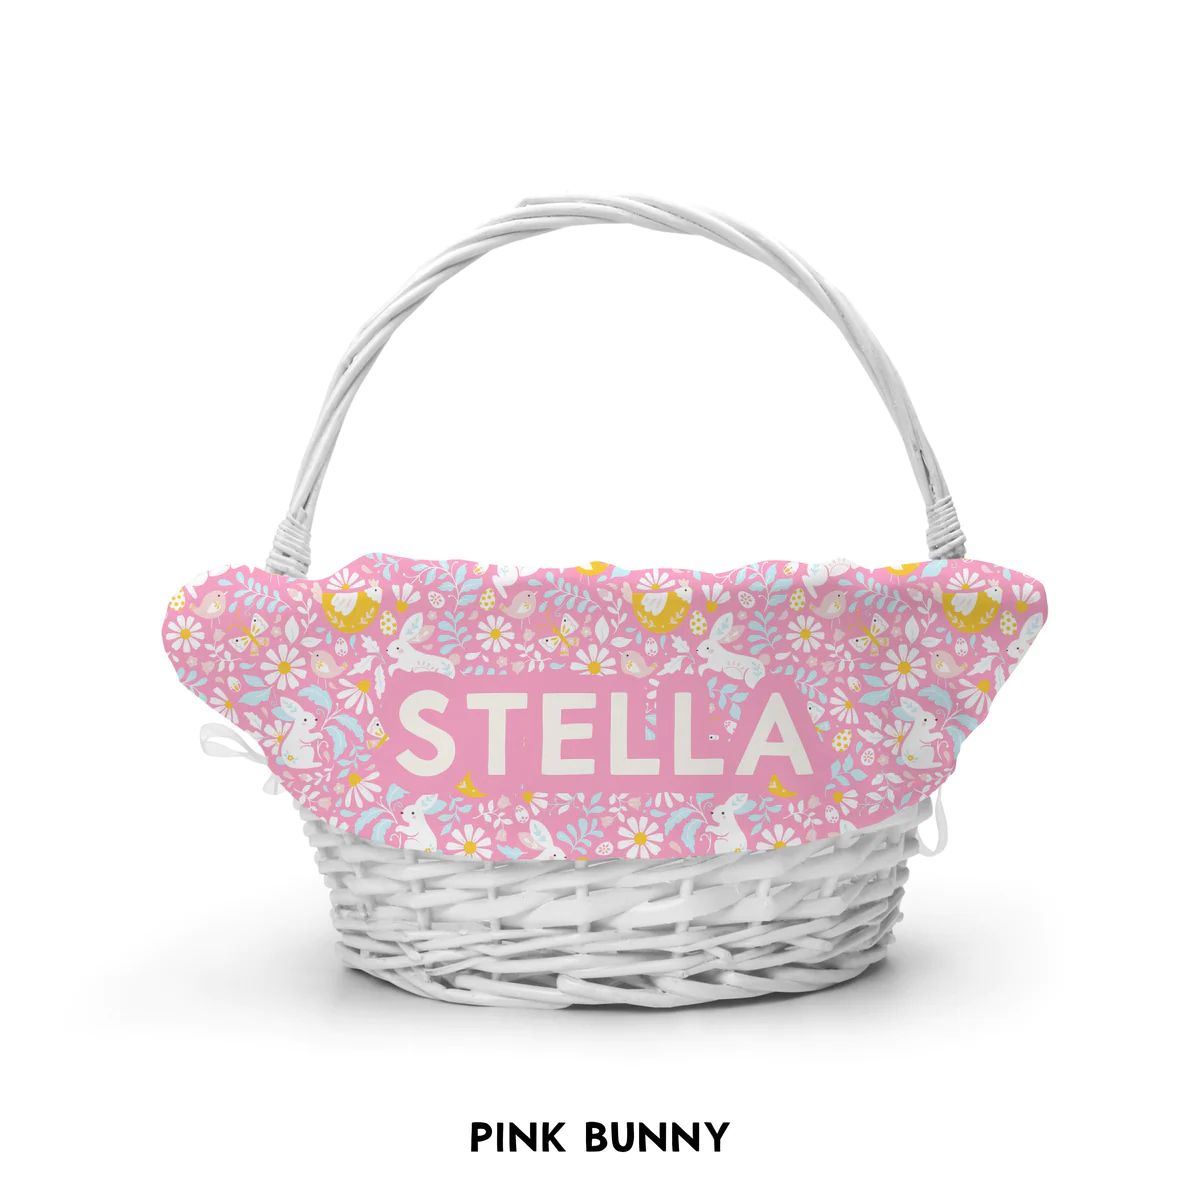 Personalized Easter Basket Liner - Pink Bunny | The Little Lemons Company